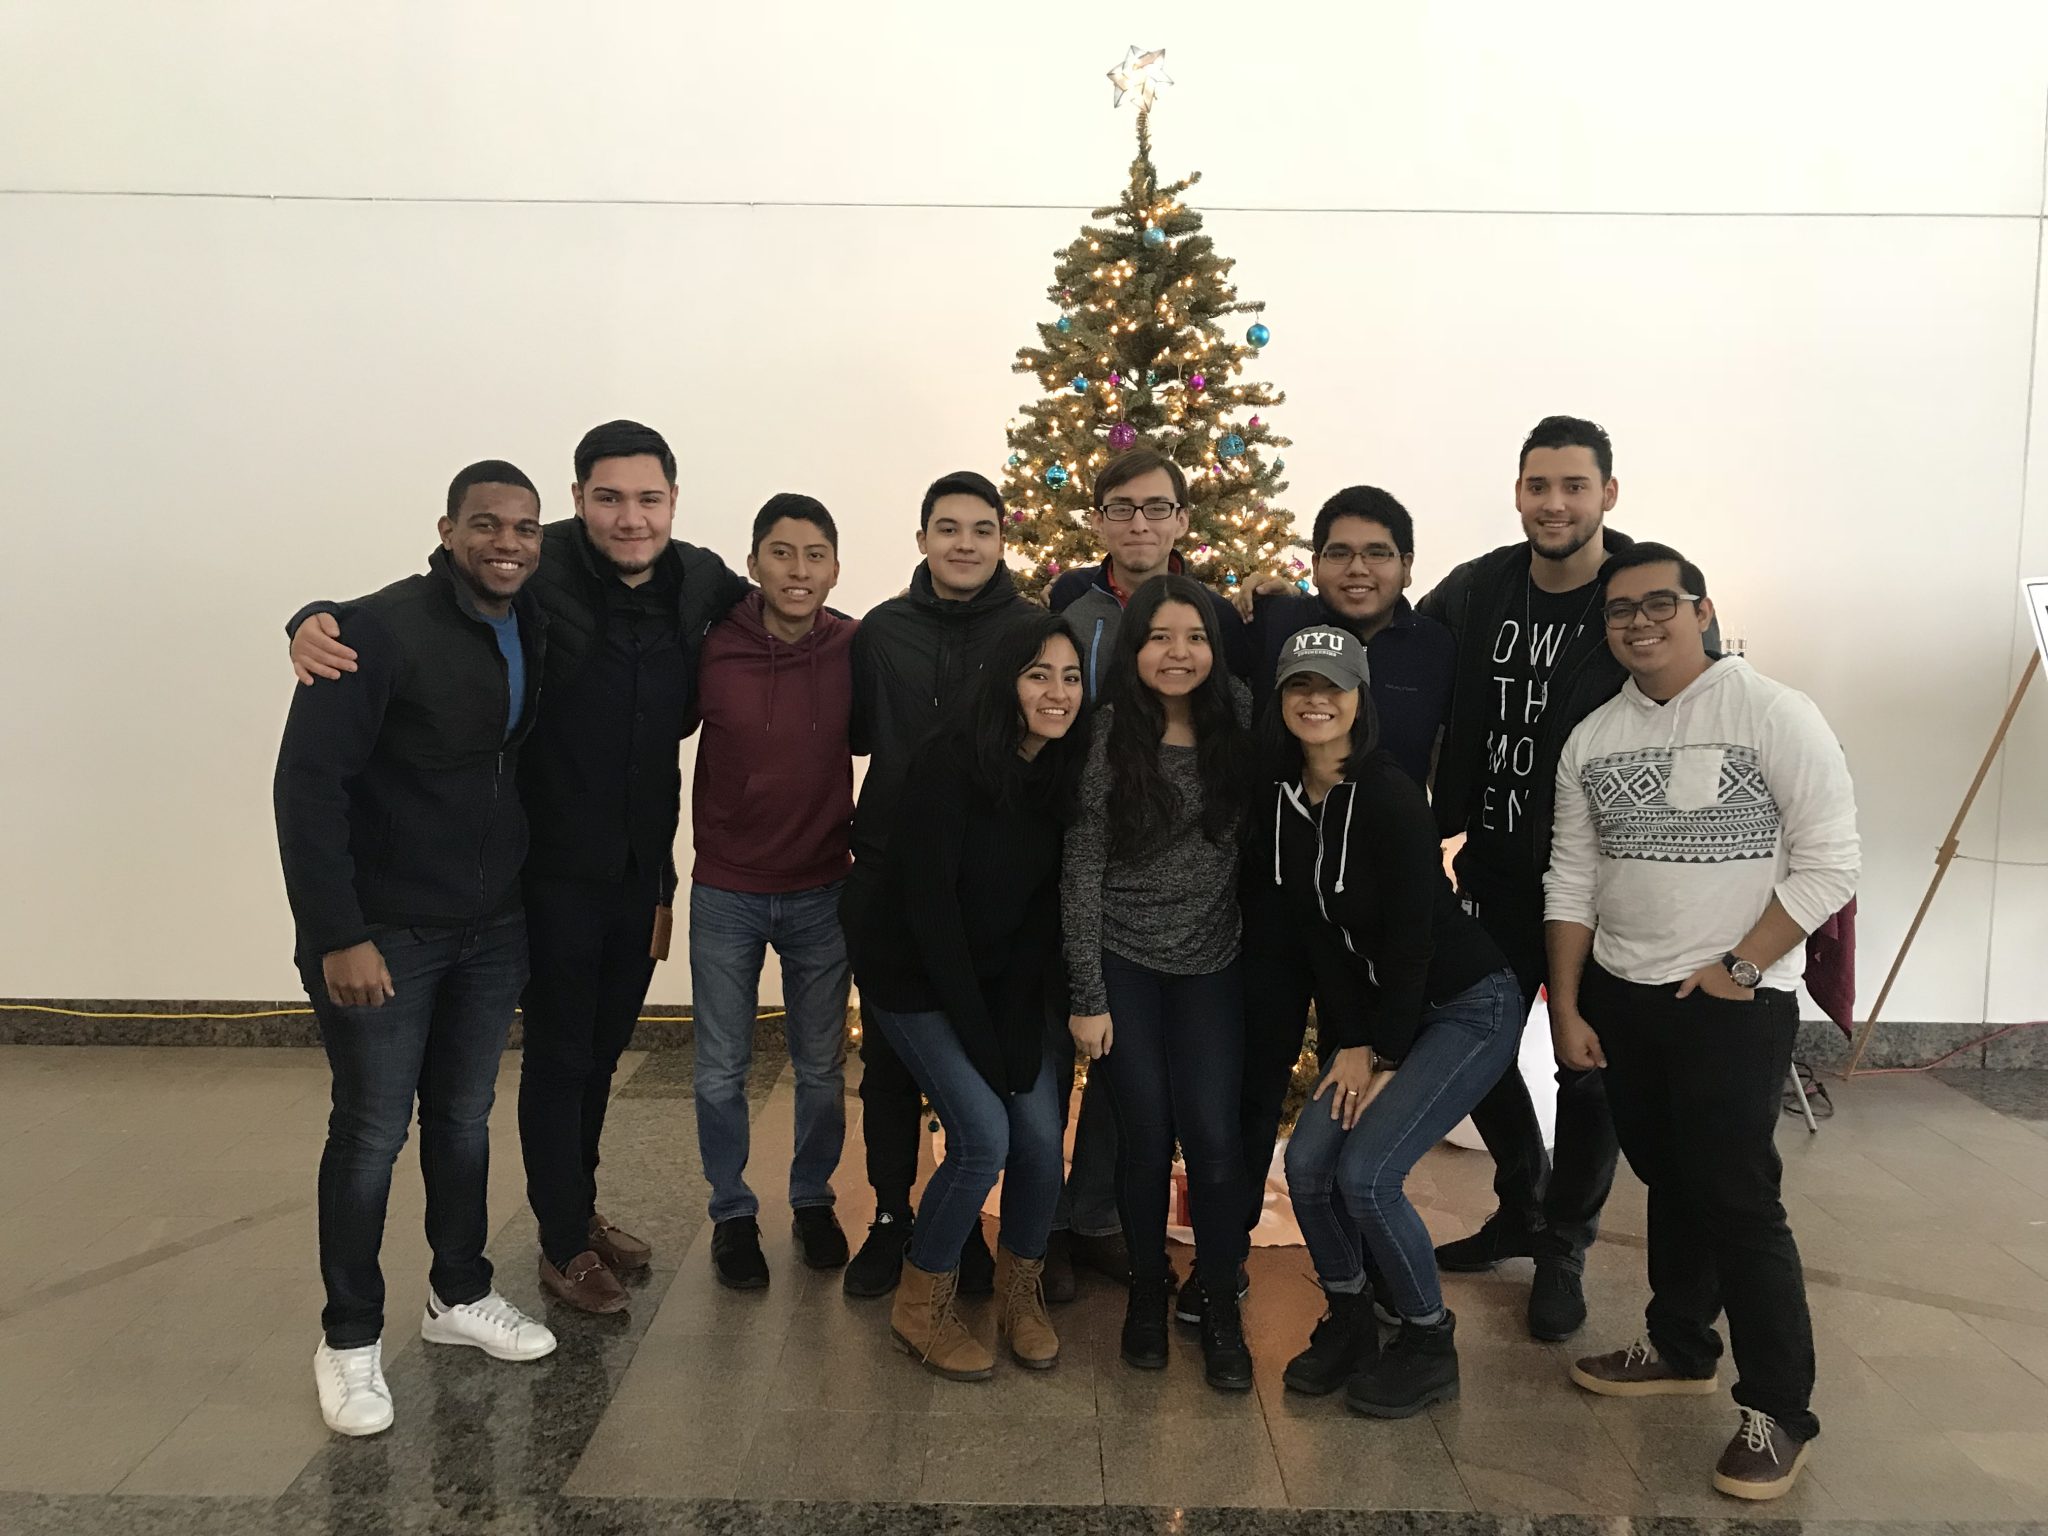 Society of Hispanic Professional Engineers Vaughn Student Chapter Attends Holiday Dinner and Receive Recognition